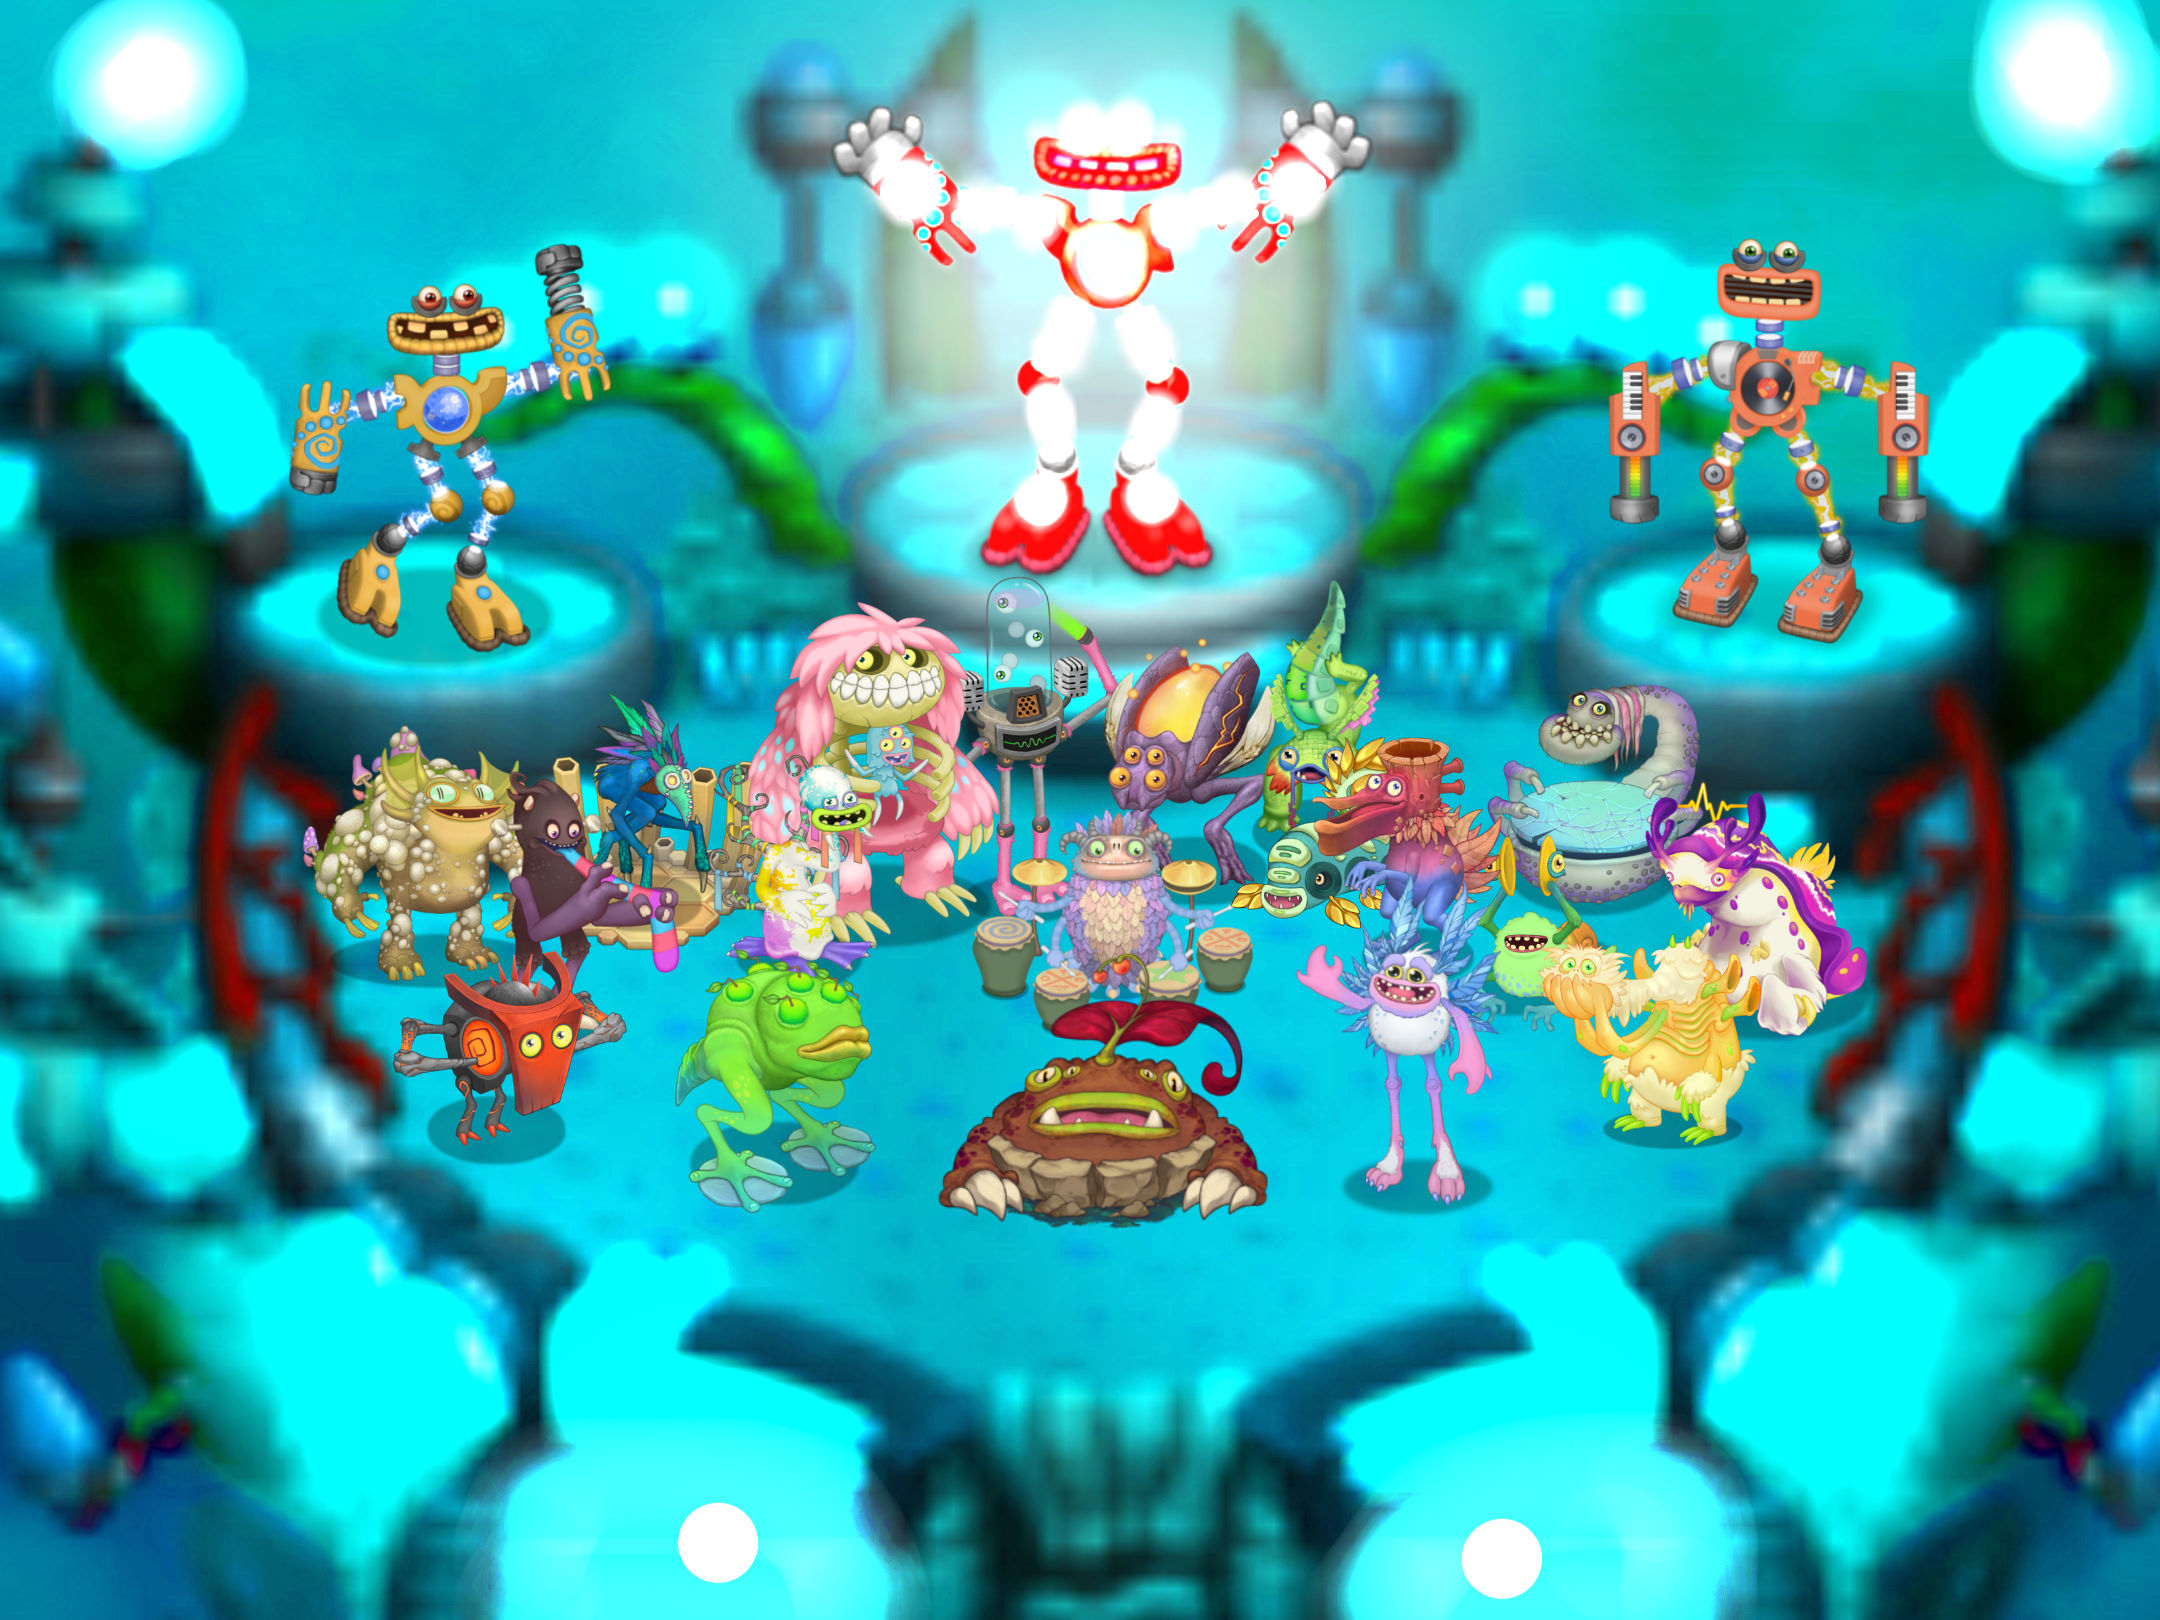 If the Fanmade and Real Air Island Epic Wubboxes Switched